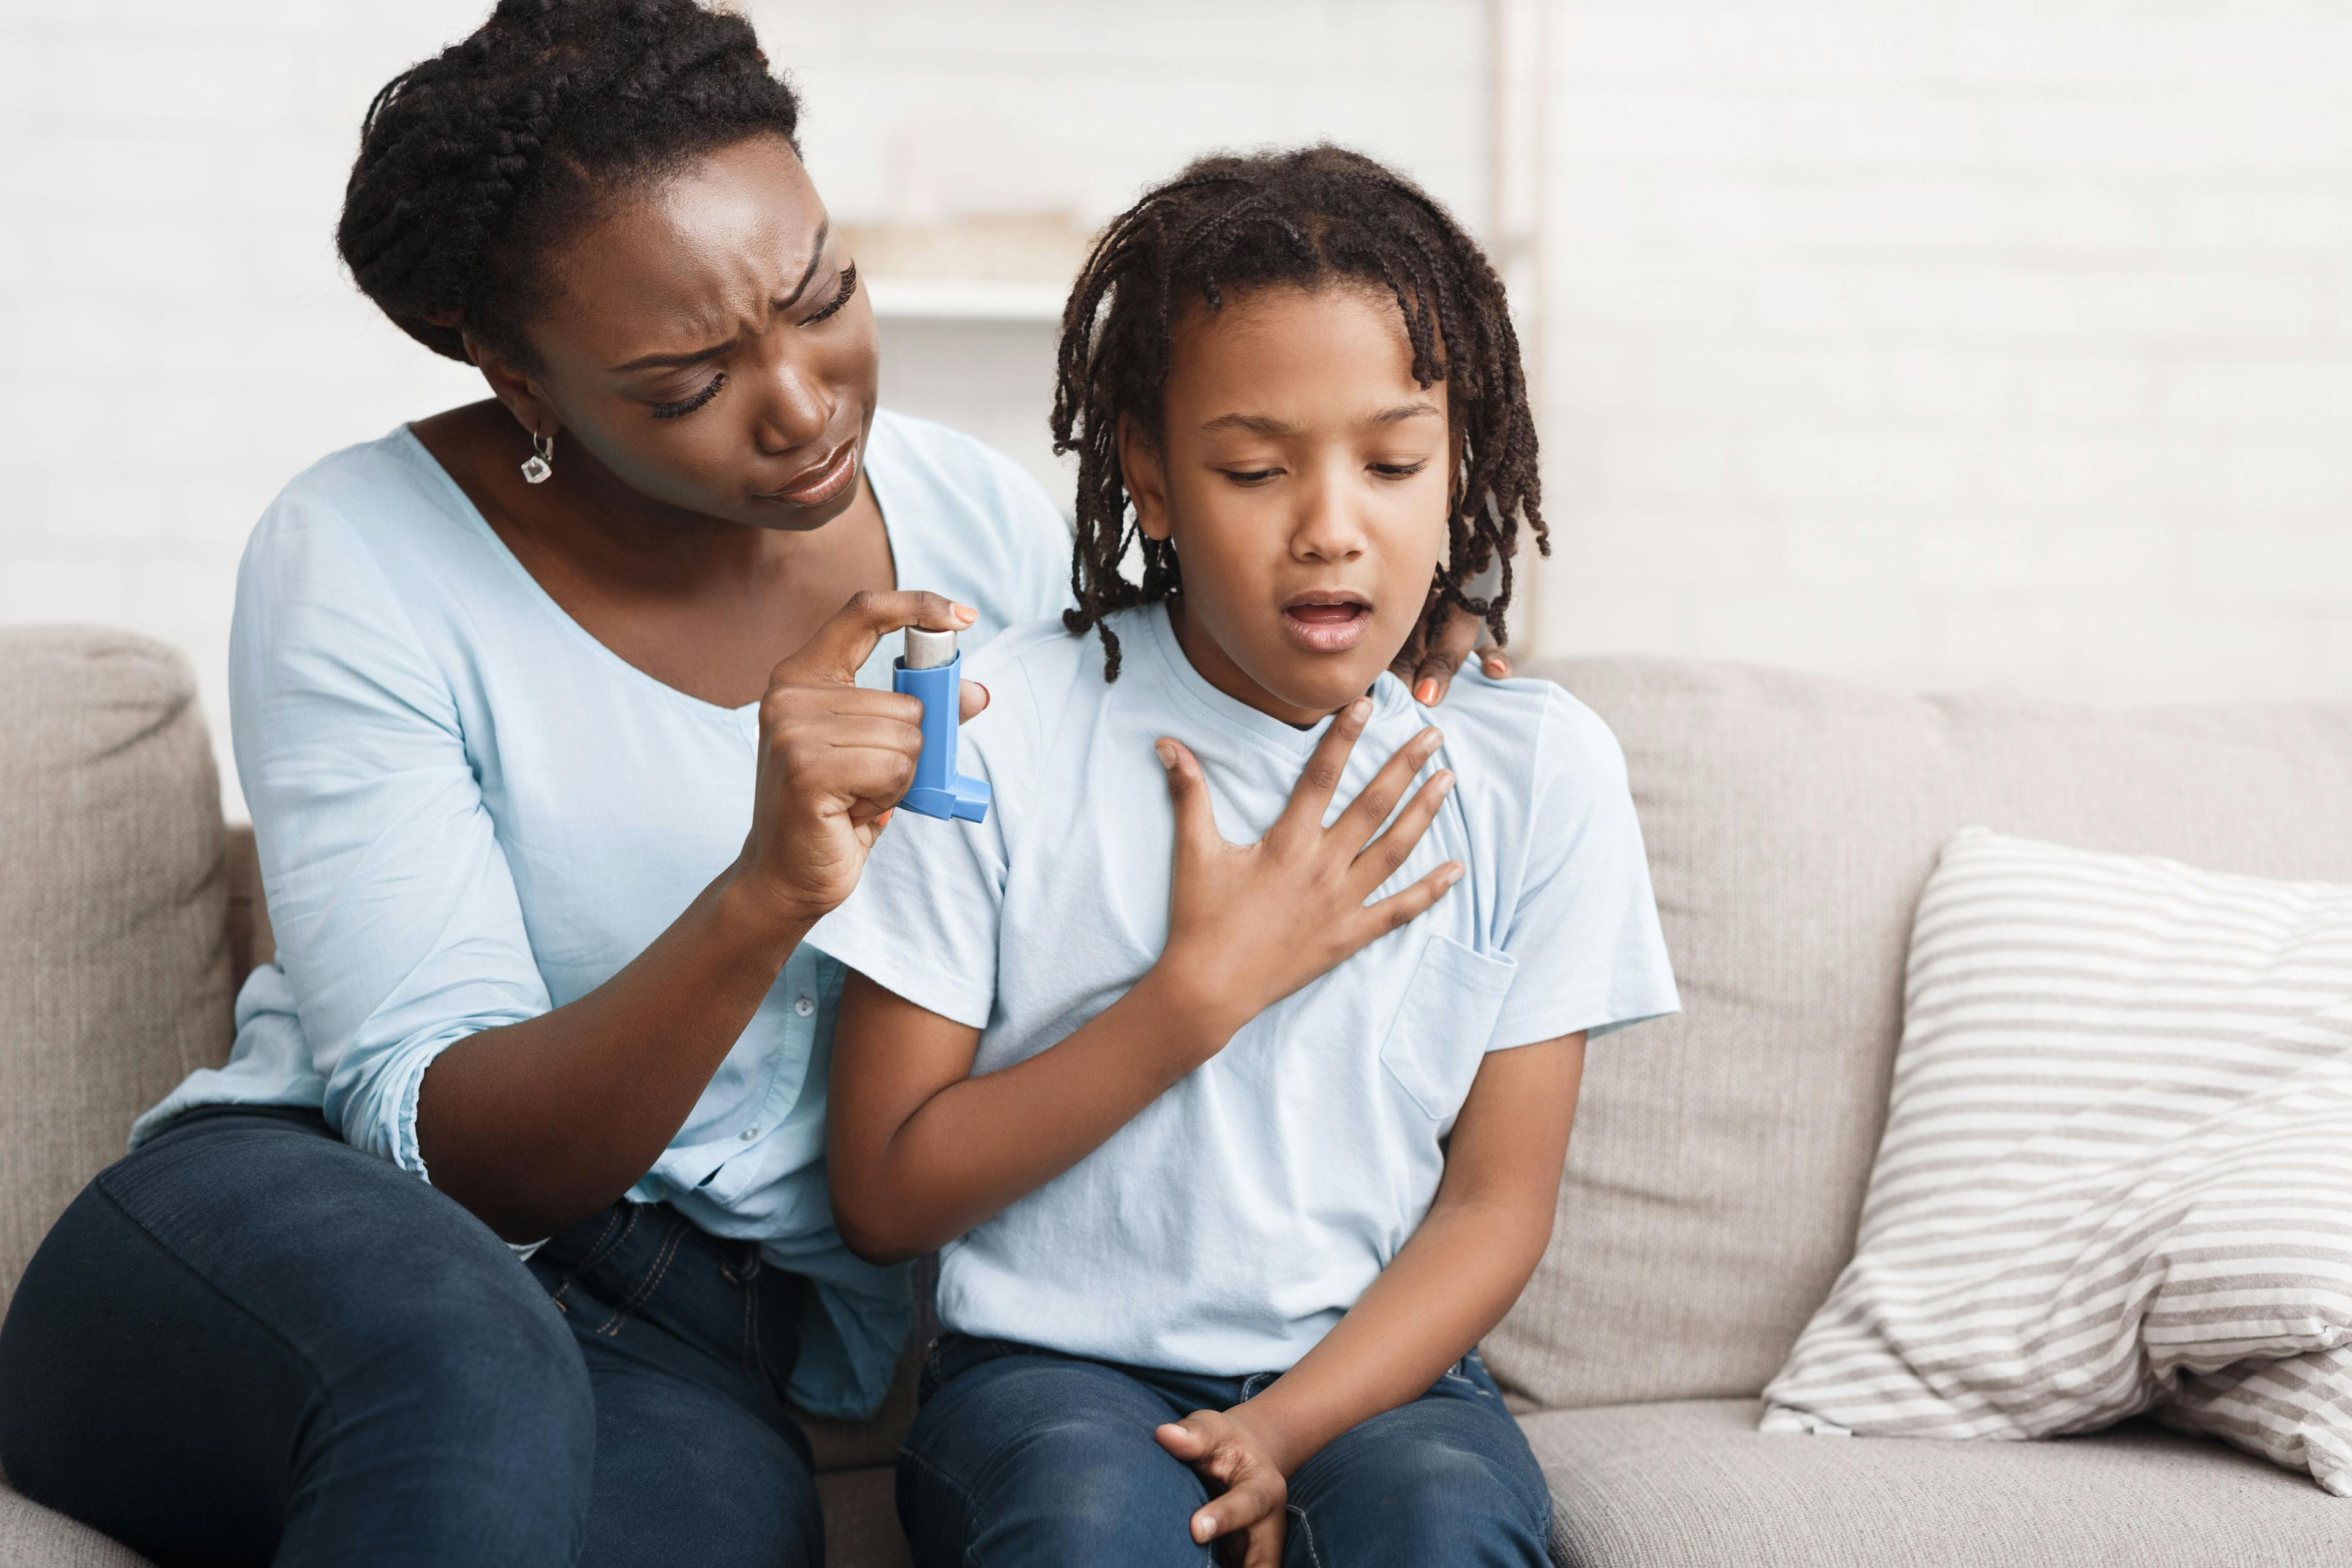 New tool for identifying asthma risk in young children